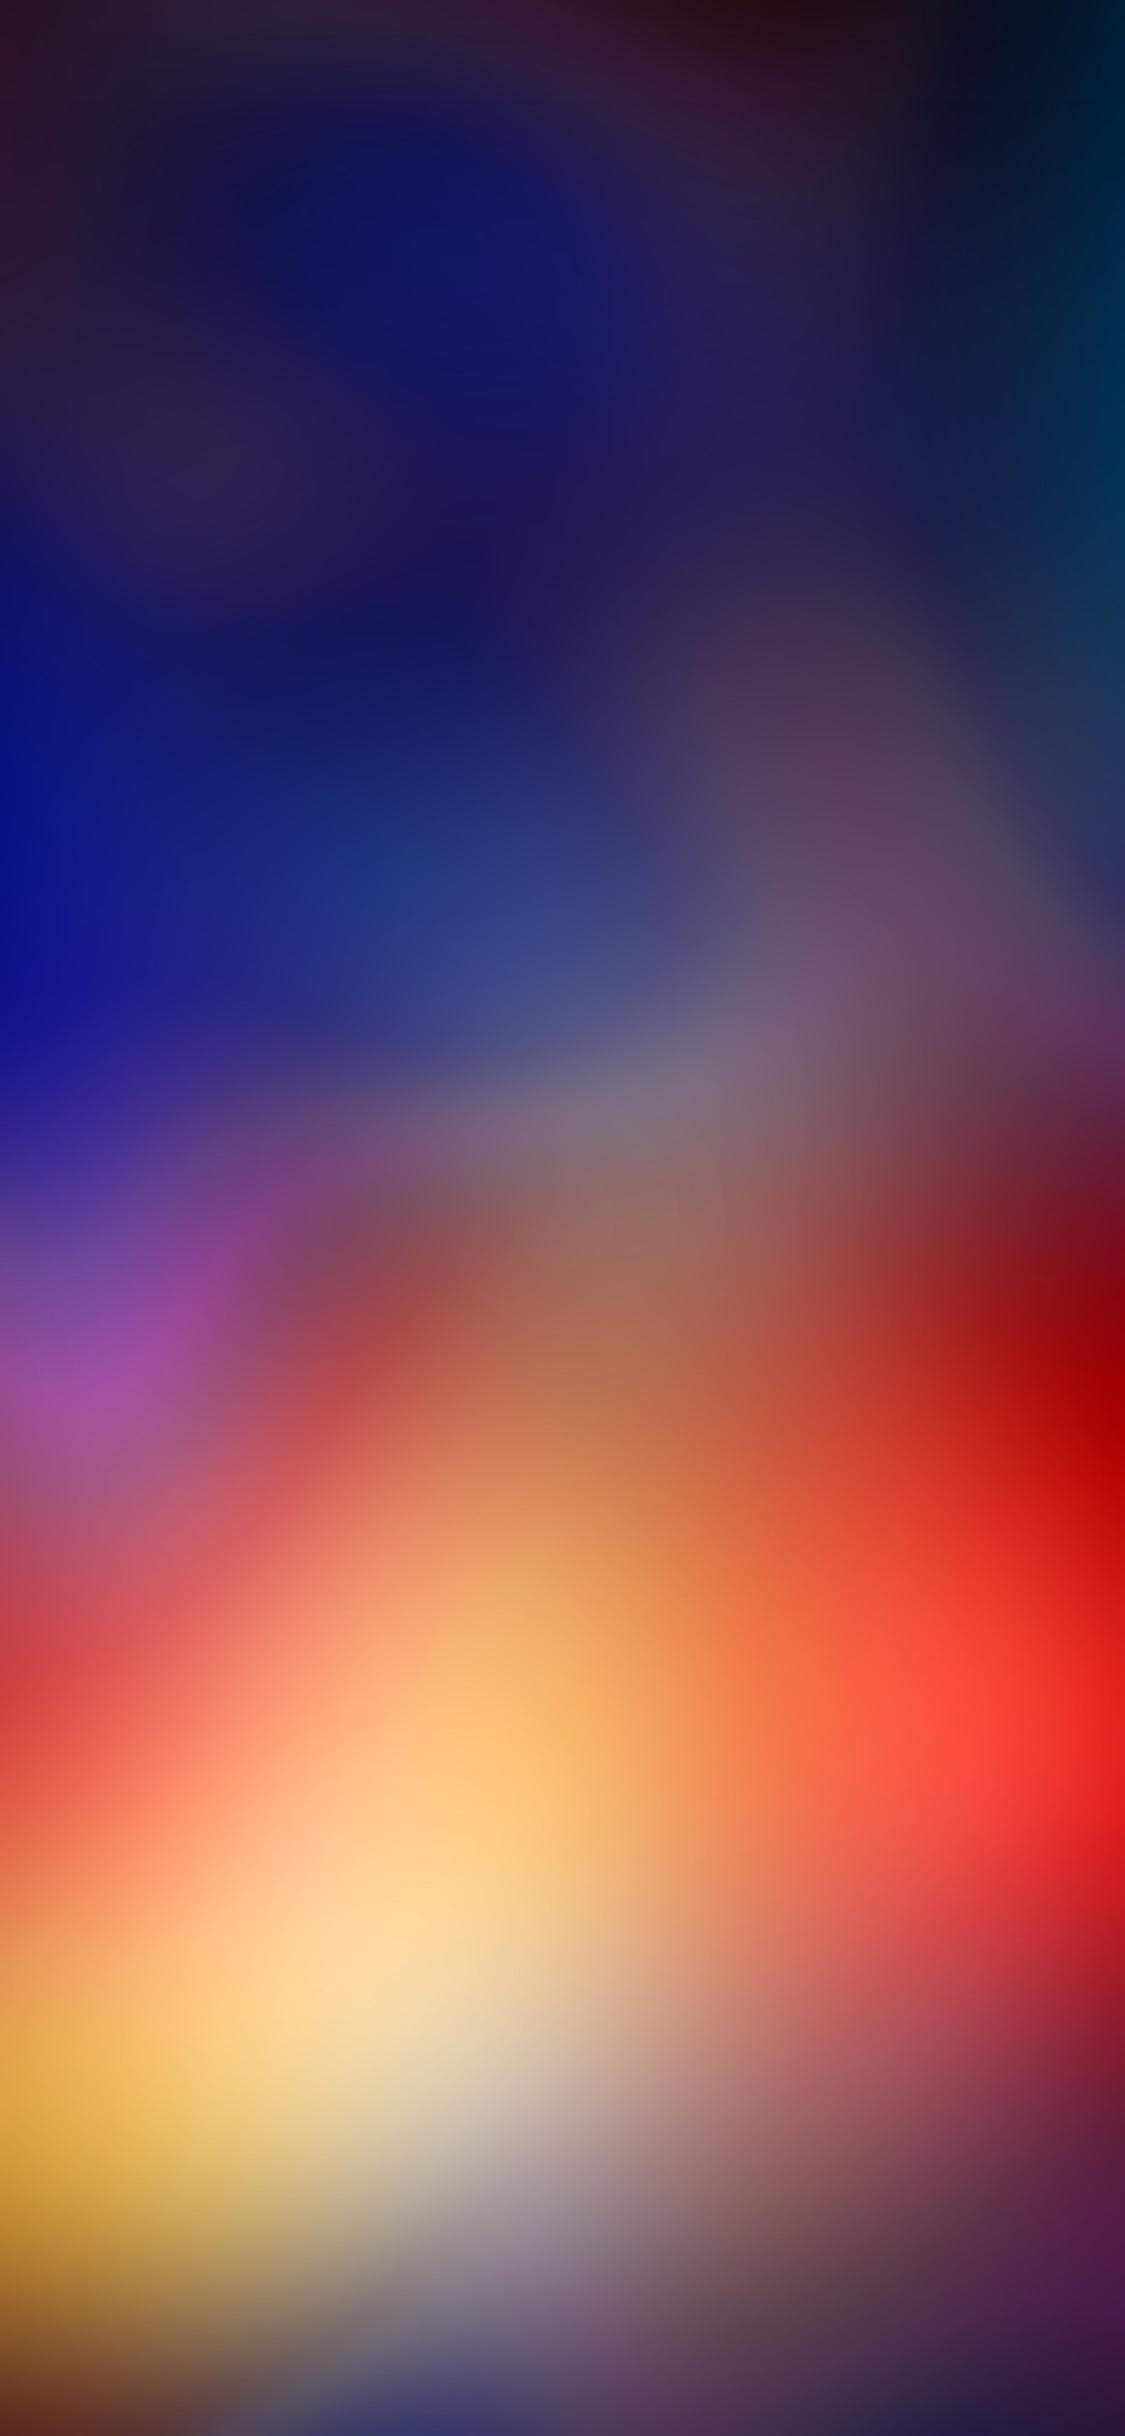 iPhone x wallpaper 5k. Download free HD image and picture